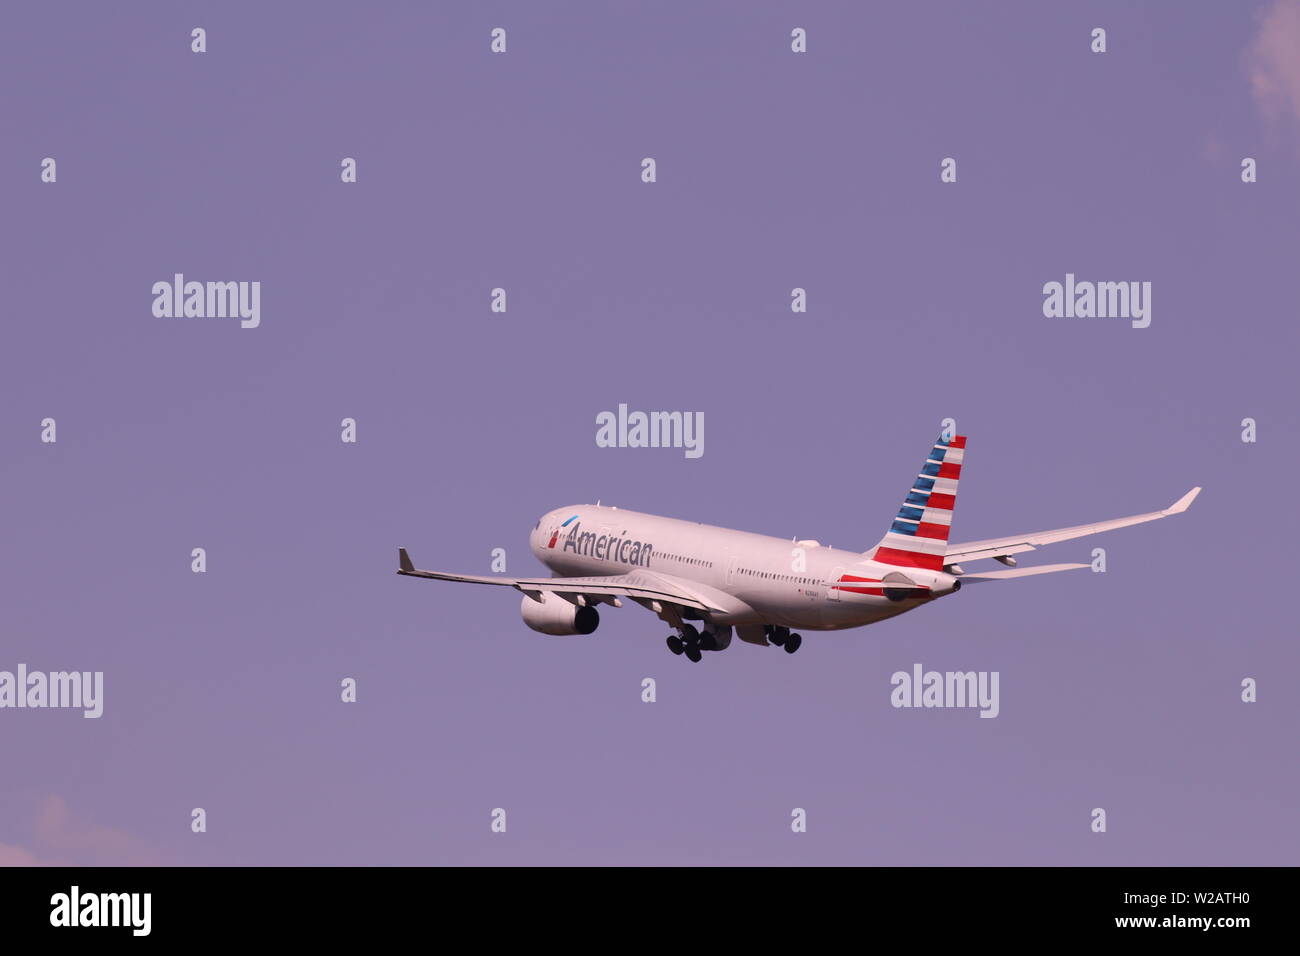 American Airlines planes taking off at CLT, Charlotte Douglas International Airport, Charlotte, NC Stock Photo